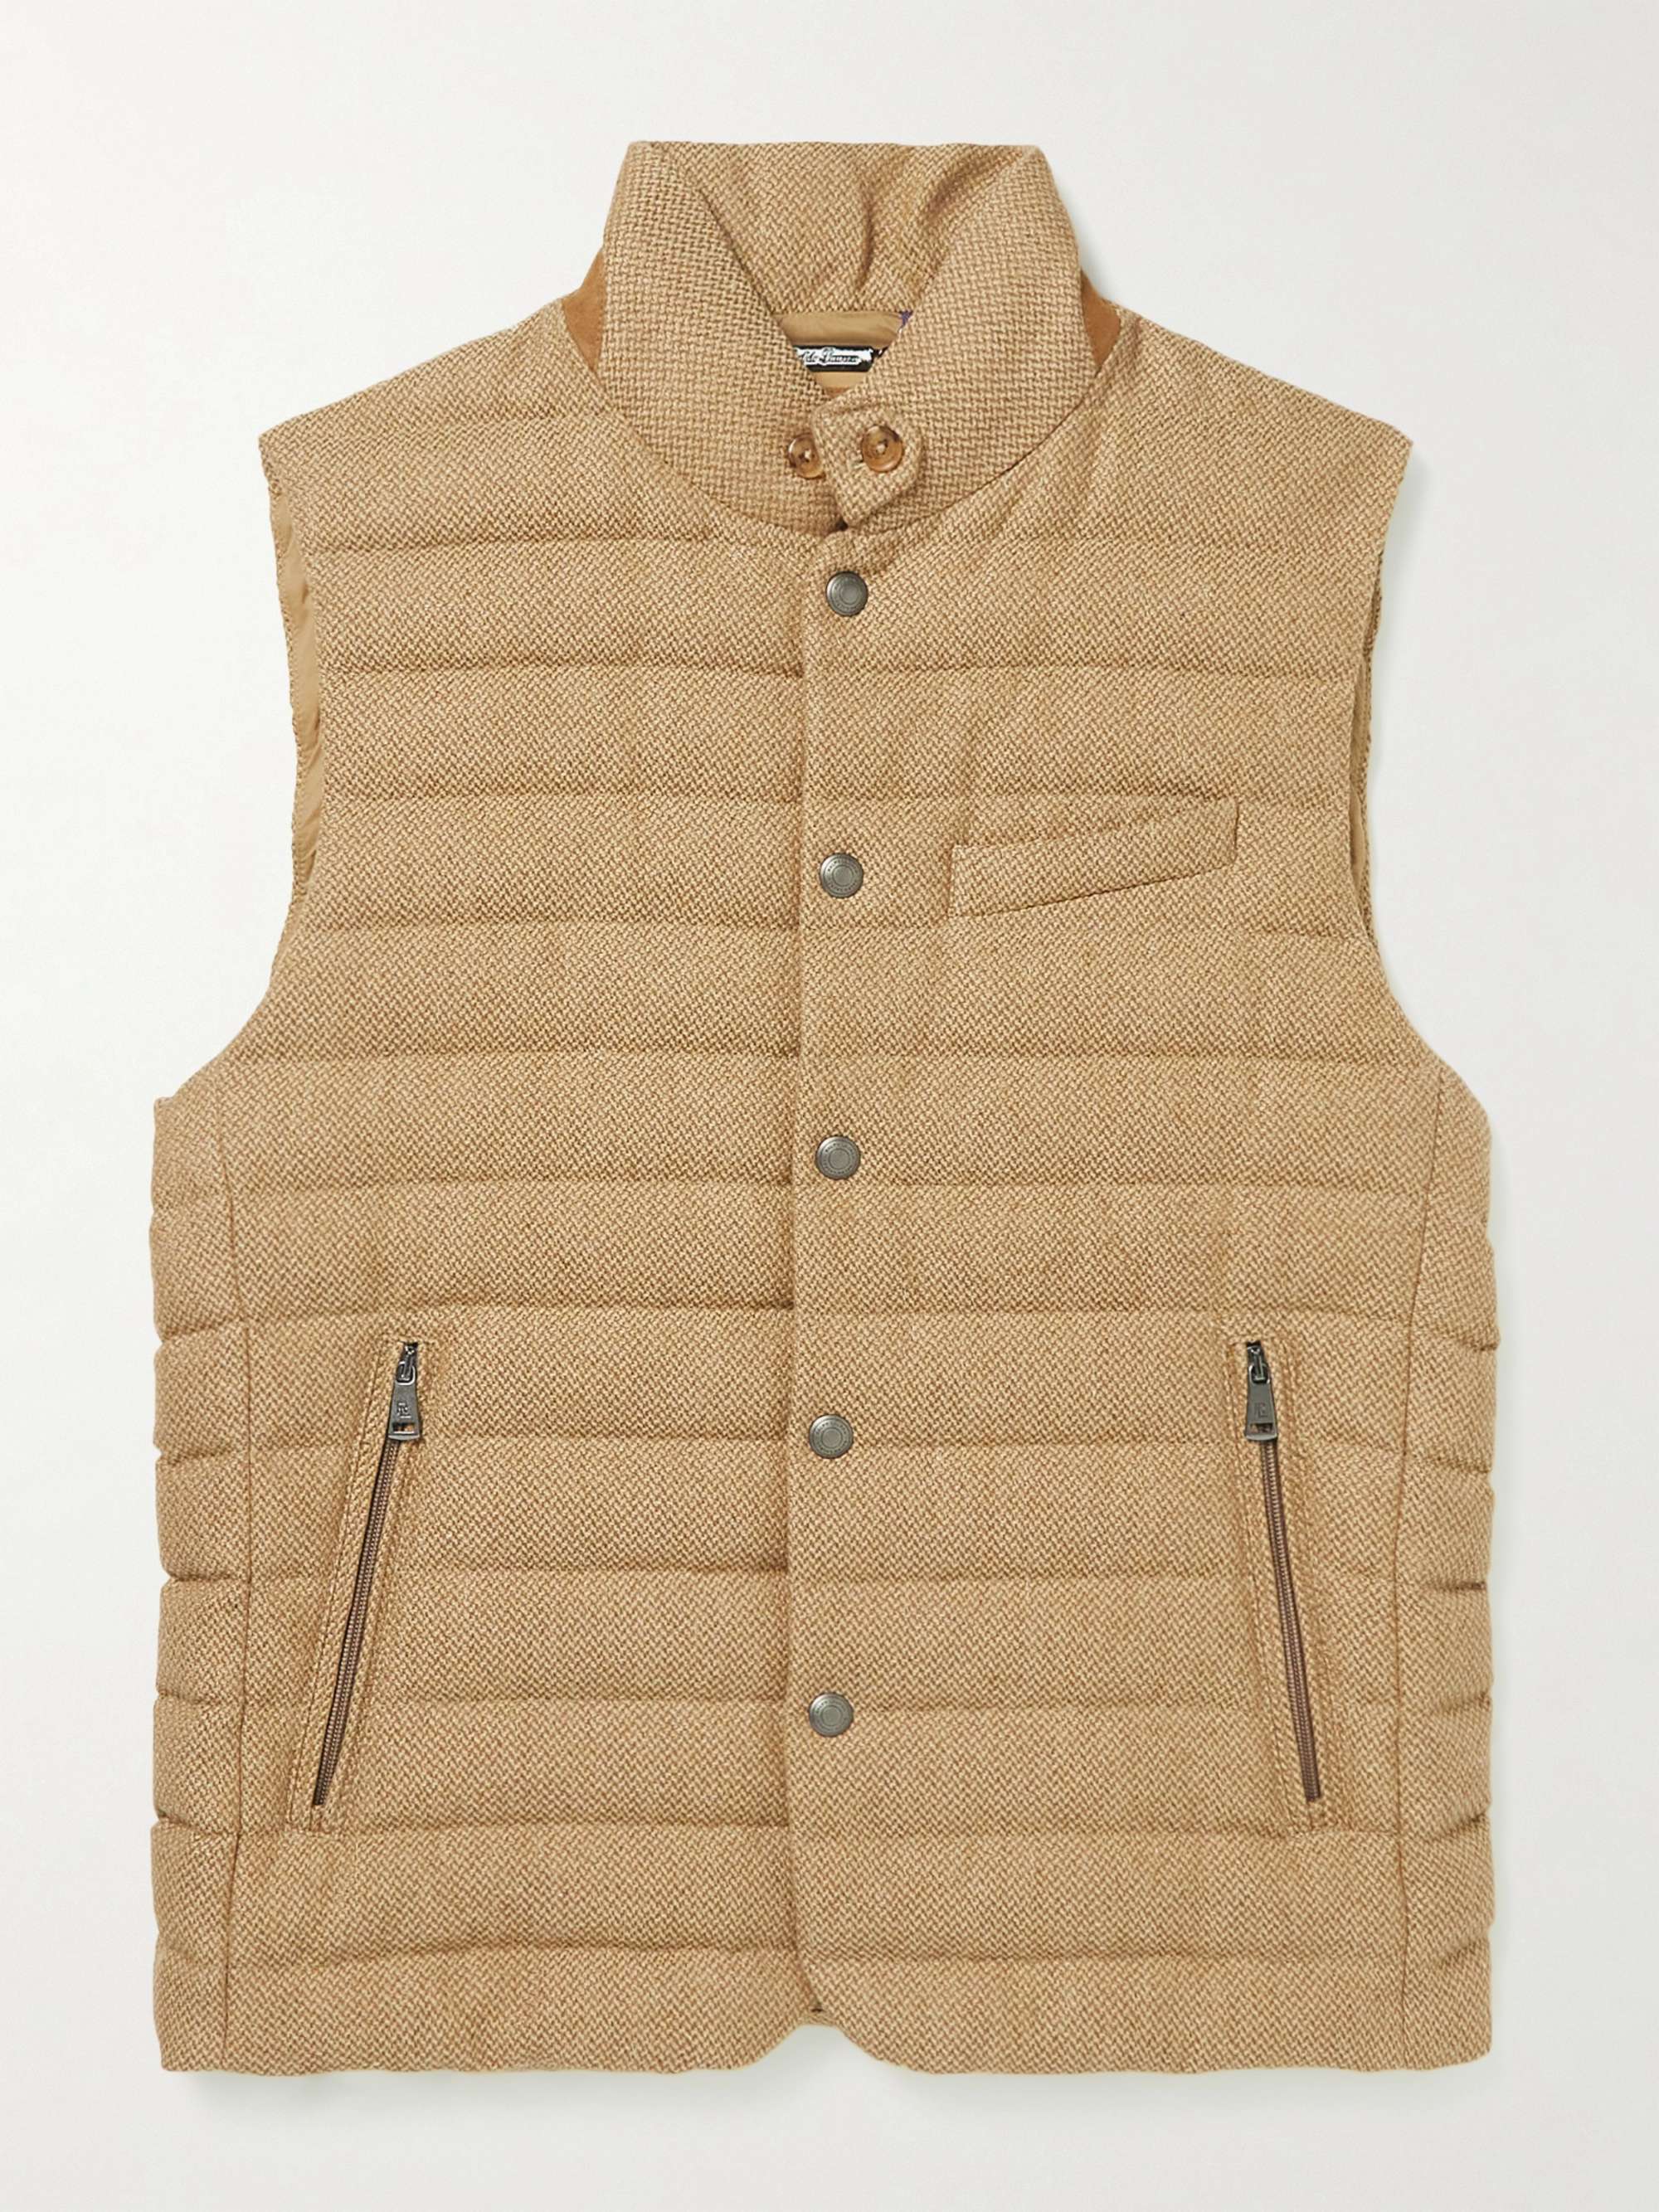 RALPH LAUREN PURPLE LABEL Whitwell Quilted Wool, Linen and Cotton-Blend Tweed Down Gilet